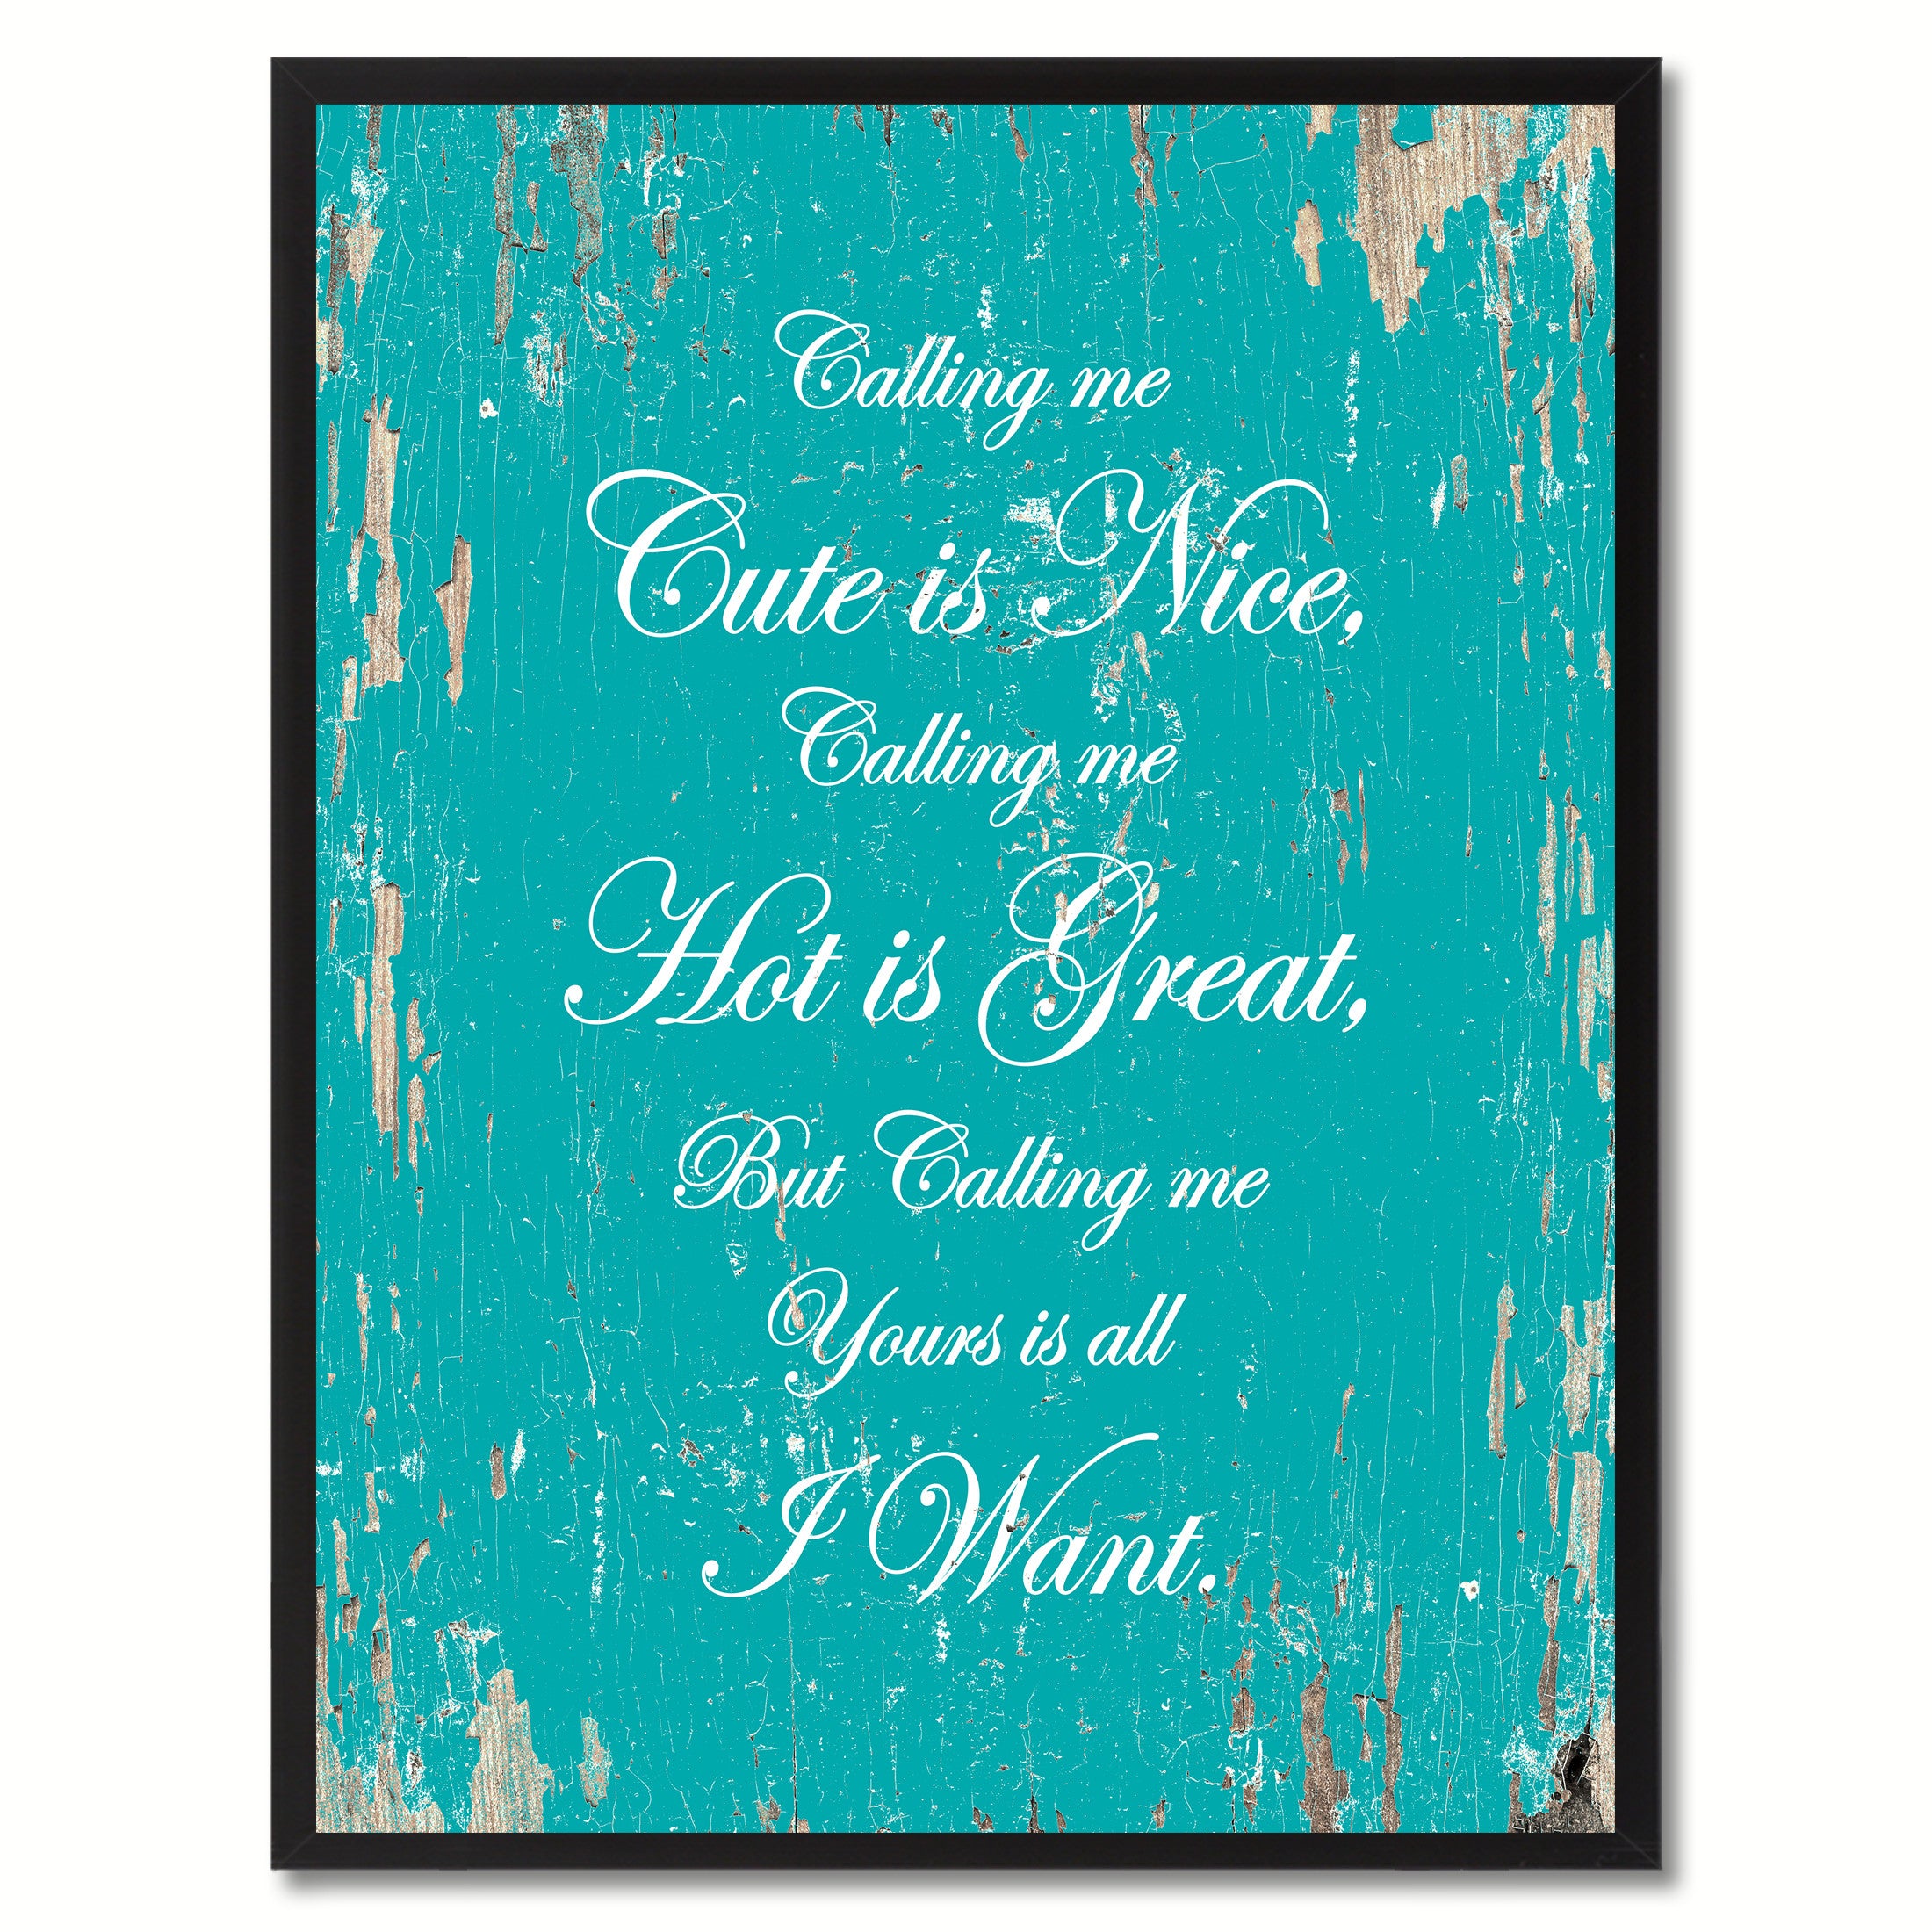 Calling me cute is nice, hot is great but yours is all I want Funny Quote Saying Canvas Print with Picture Frame Gift Ideas Home Decor Wall Art